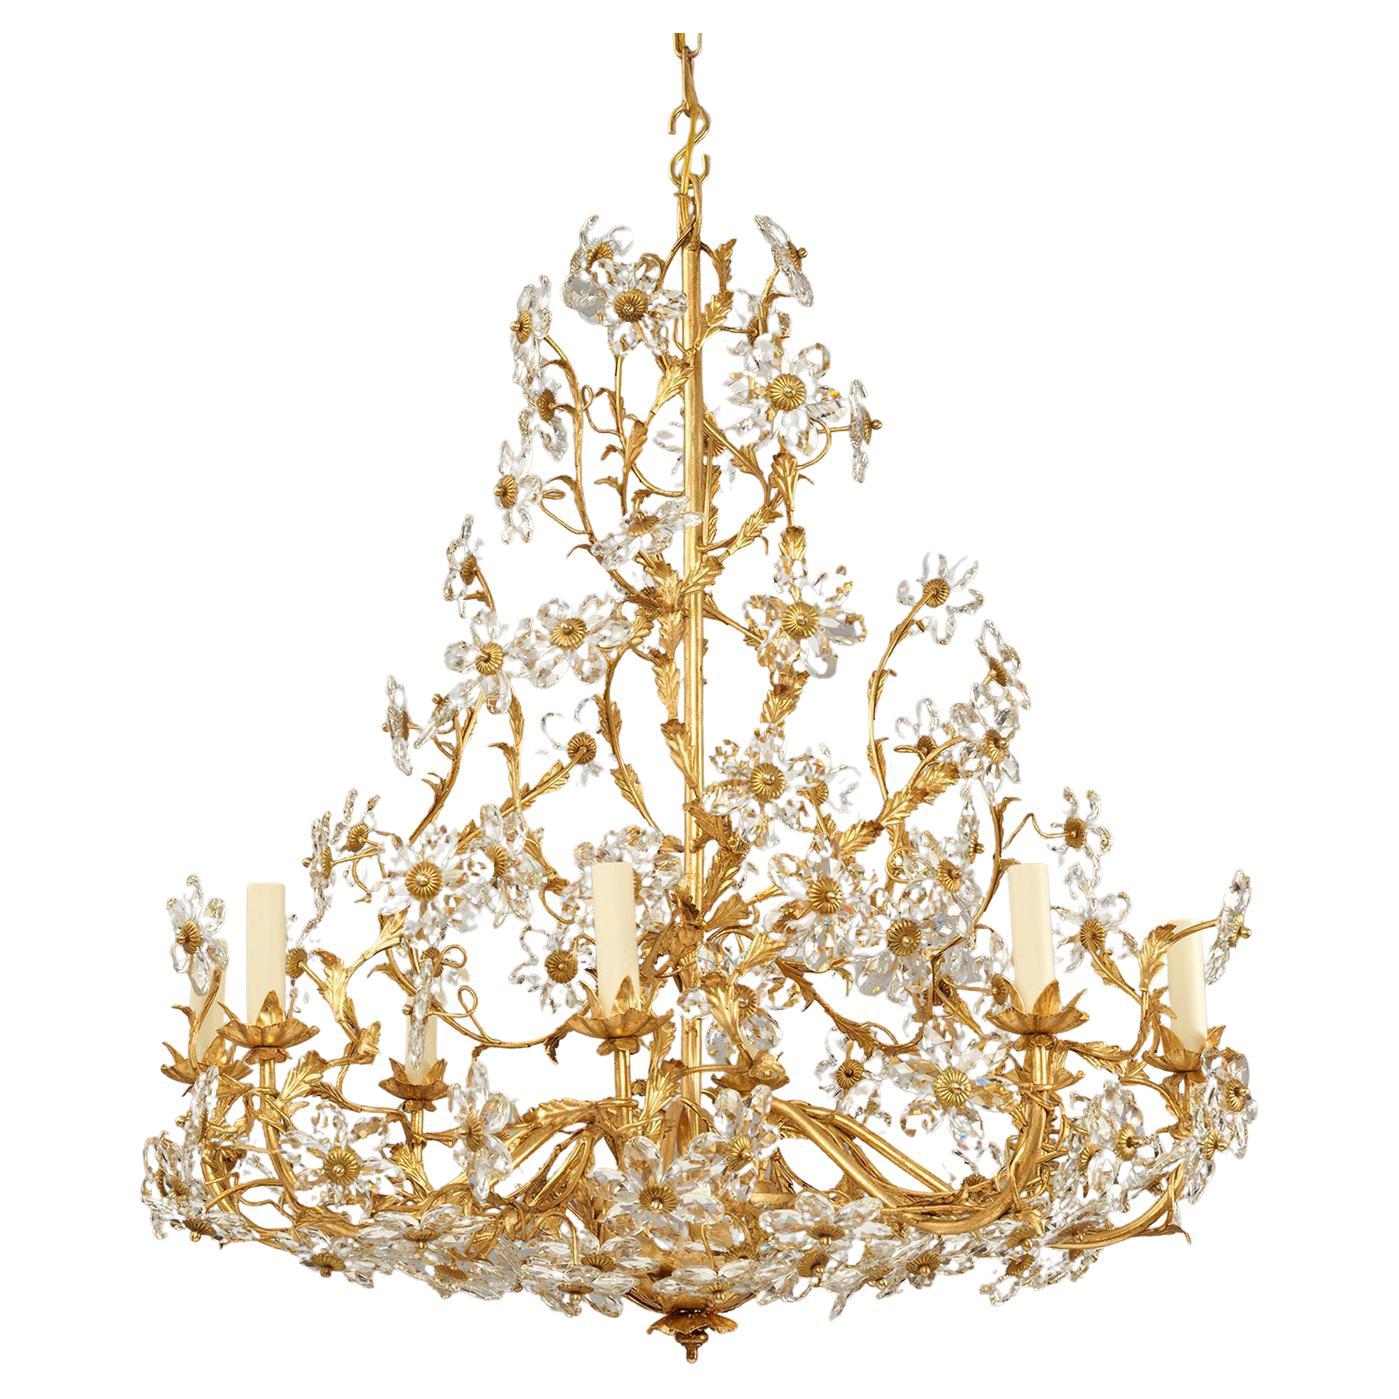 French Rococo Gilt Chandelier For Sale